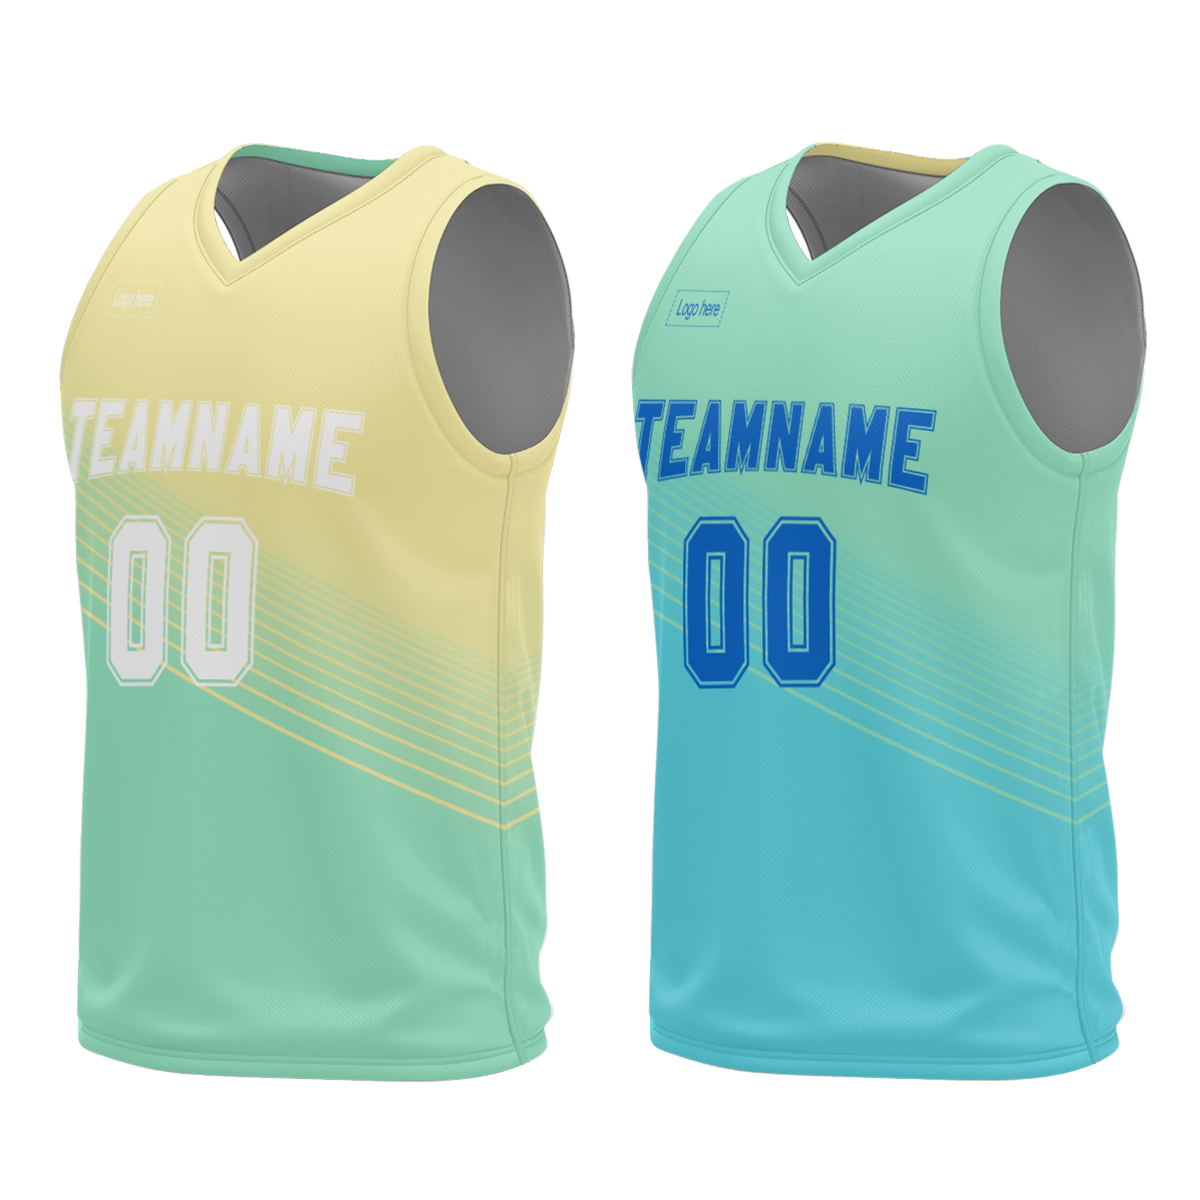 custom-sublimated-breathable-collage-basketball-shirts-full-printed-mens-reversible-blank-basketball-jersey-uniform-clothes-at-cj-pod-5